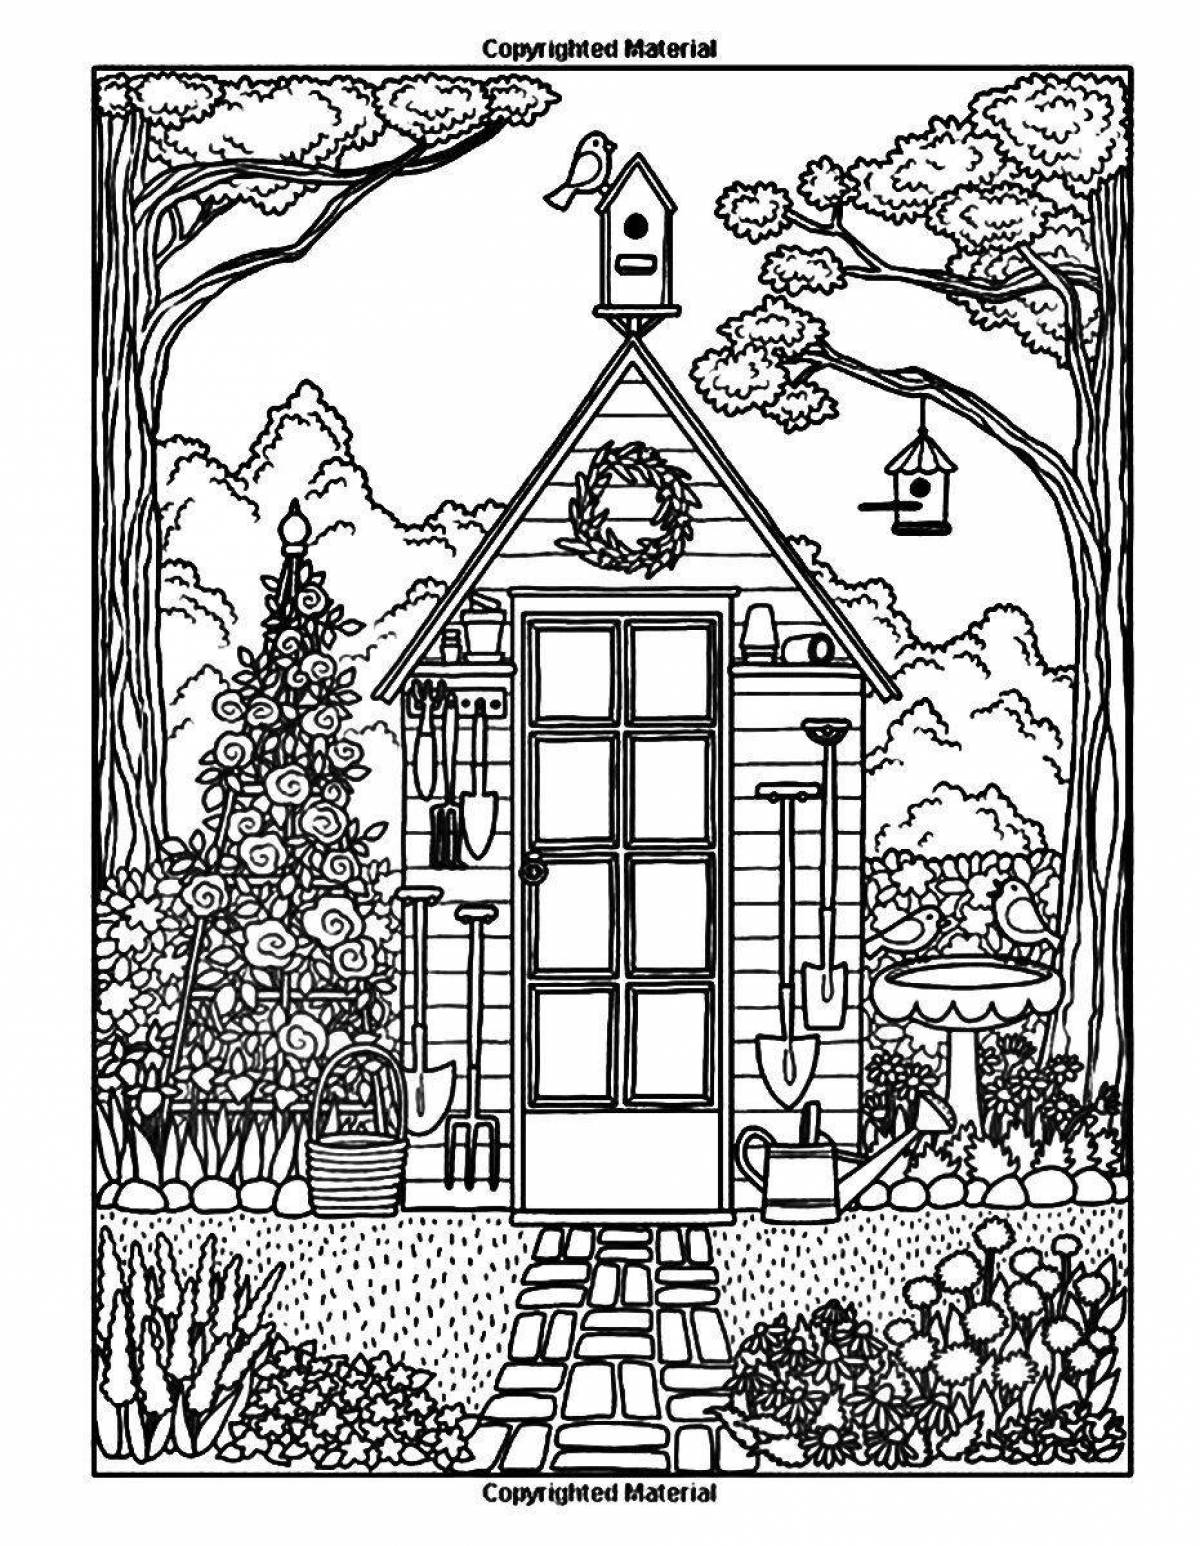 Coloring page charming houses and flowers